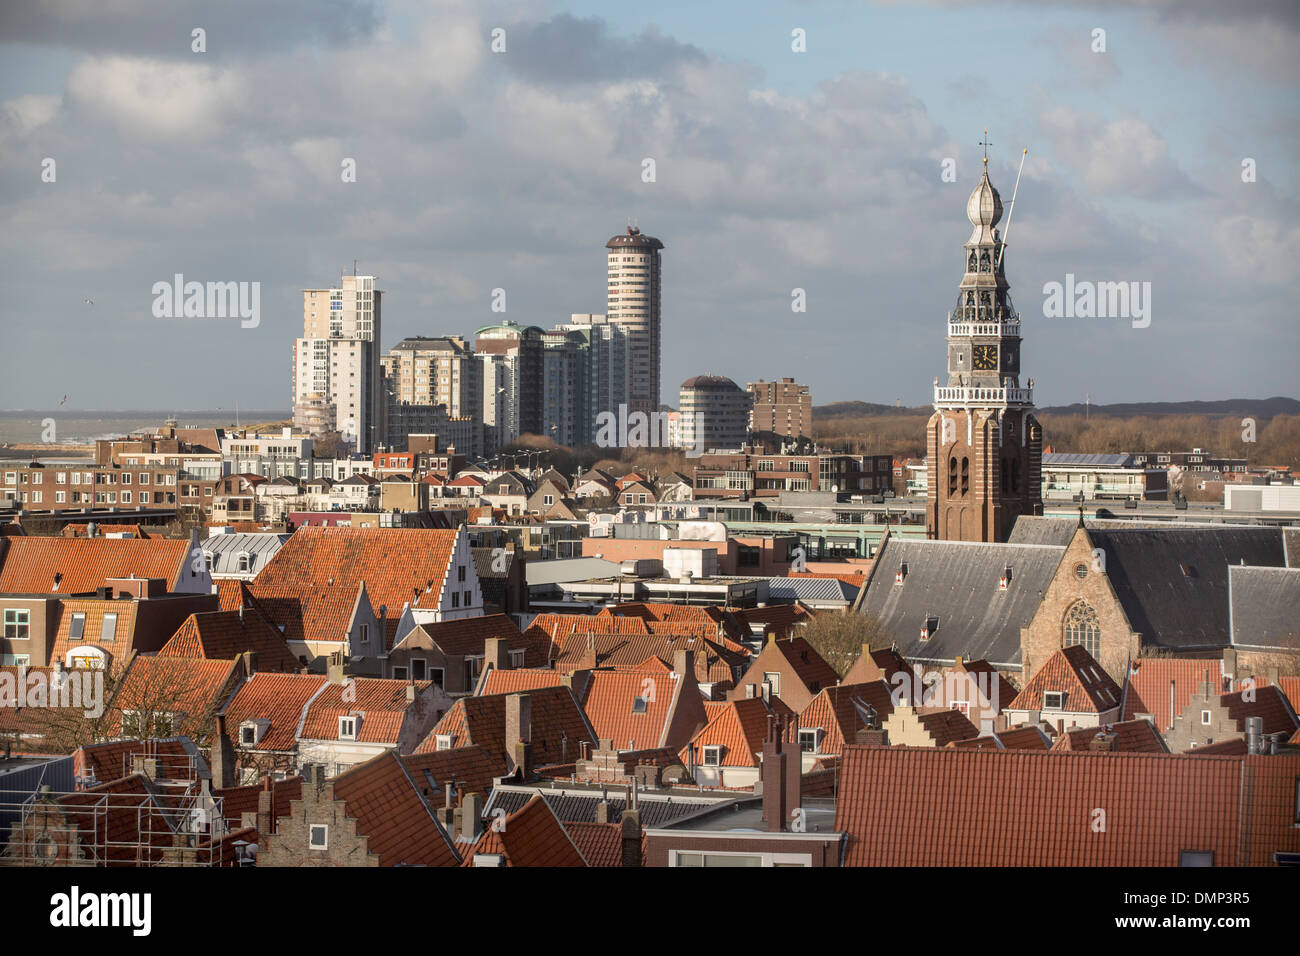 Netherlands, Vlissingen, Aerial view from Arsenaal Tower on historic city and present-day residential buildings. Stock Photo